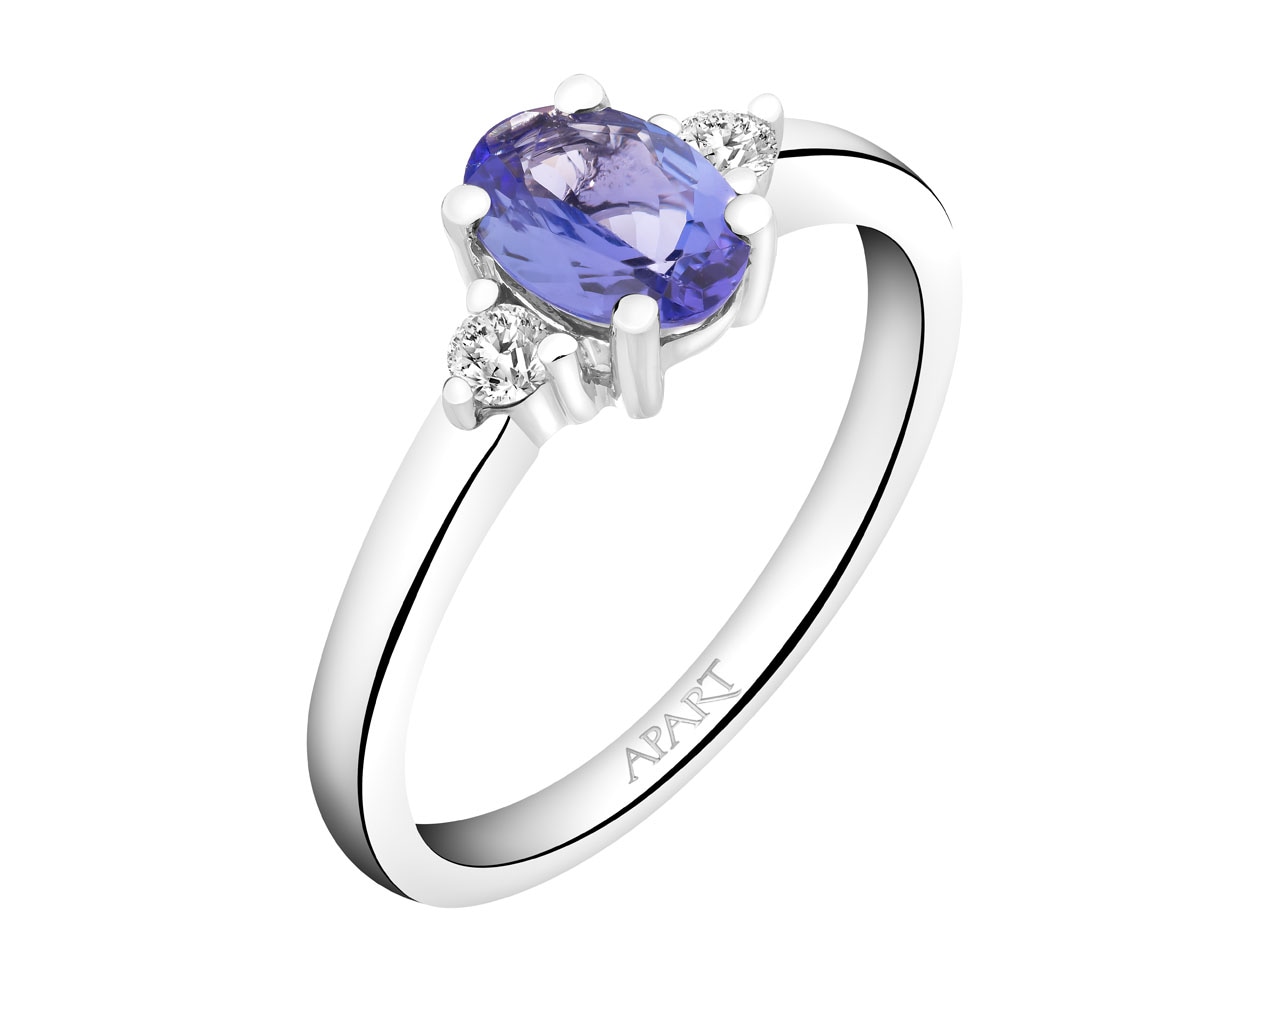 White gold ring with brilliants and tanzanite 0,10 ct - fineness 14 K